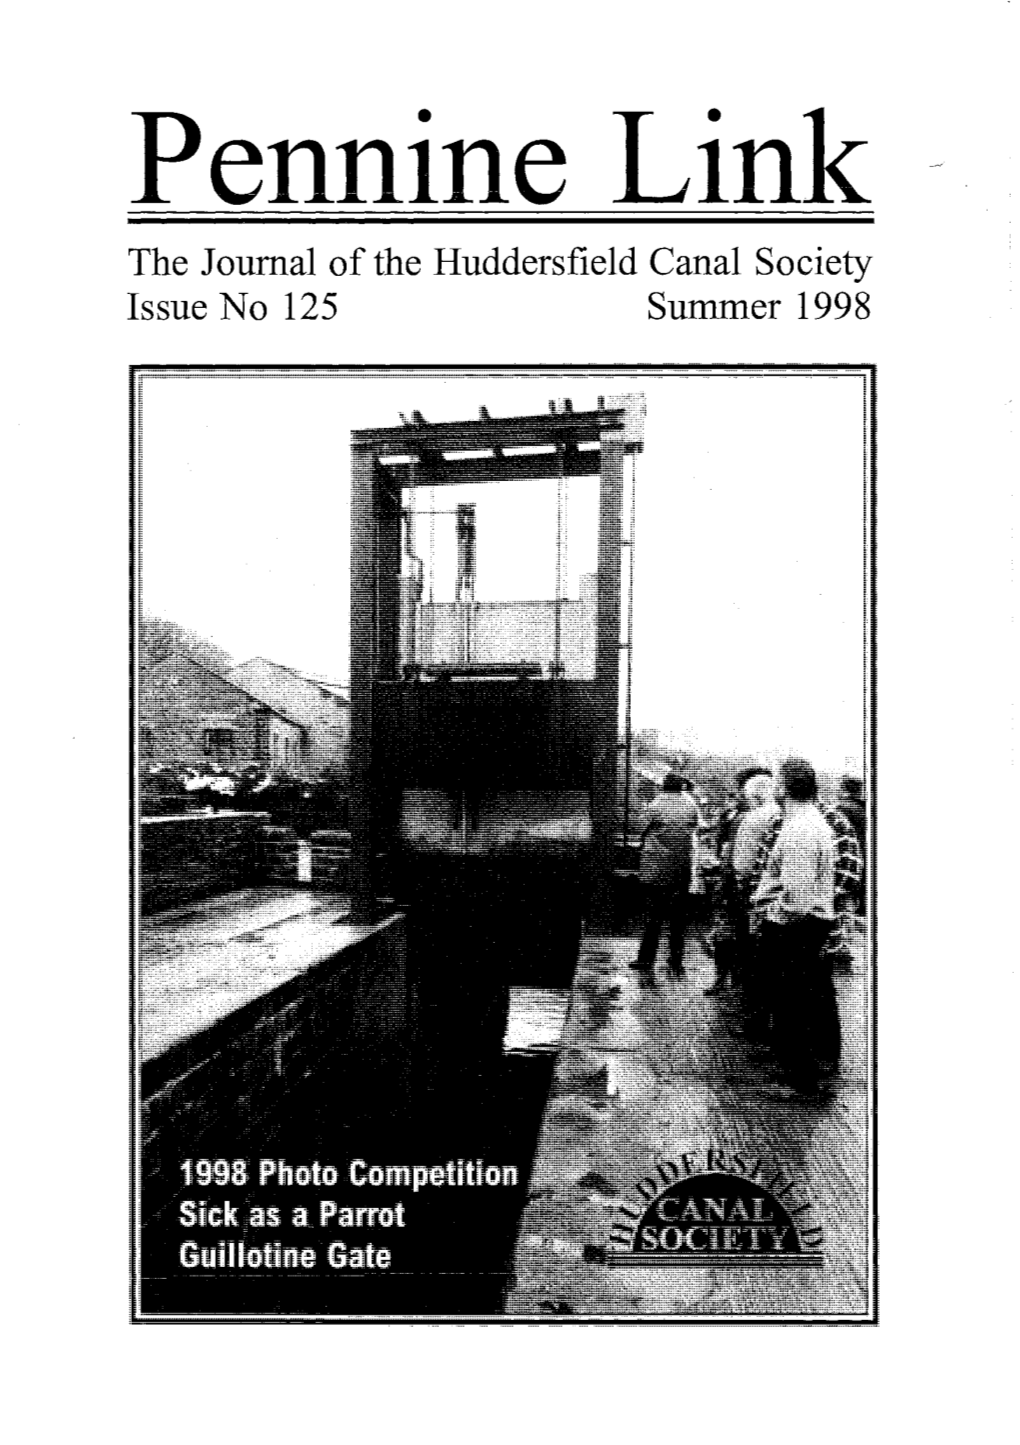 Pennine Link the Journal of the Huddersfield Canal Society Issue No 125 Summer 1998 HCS Council Members